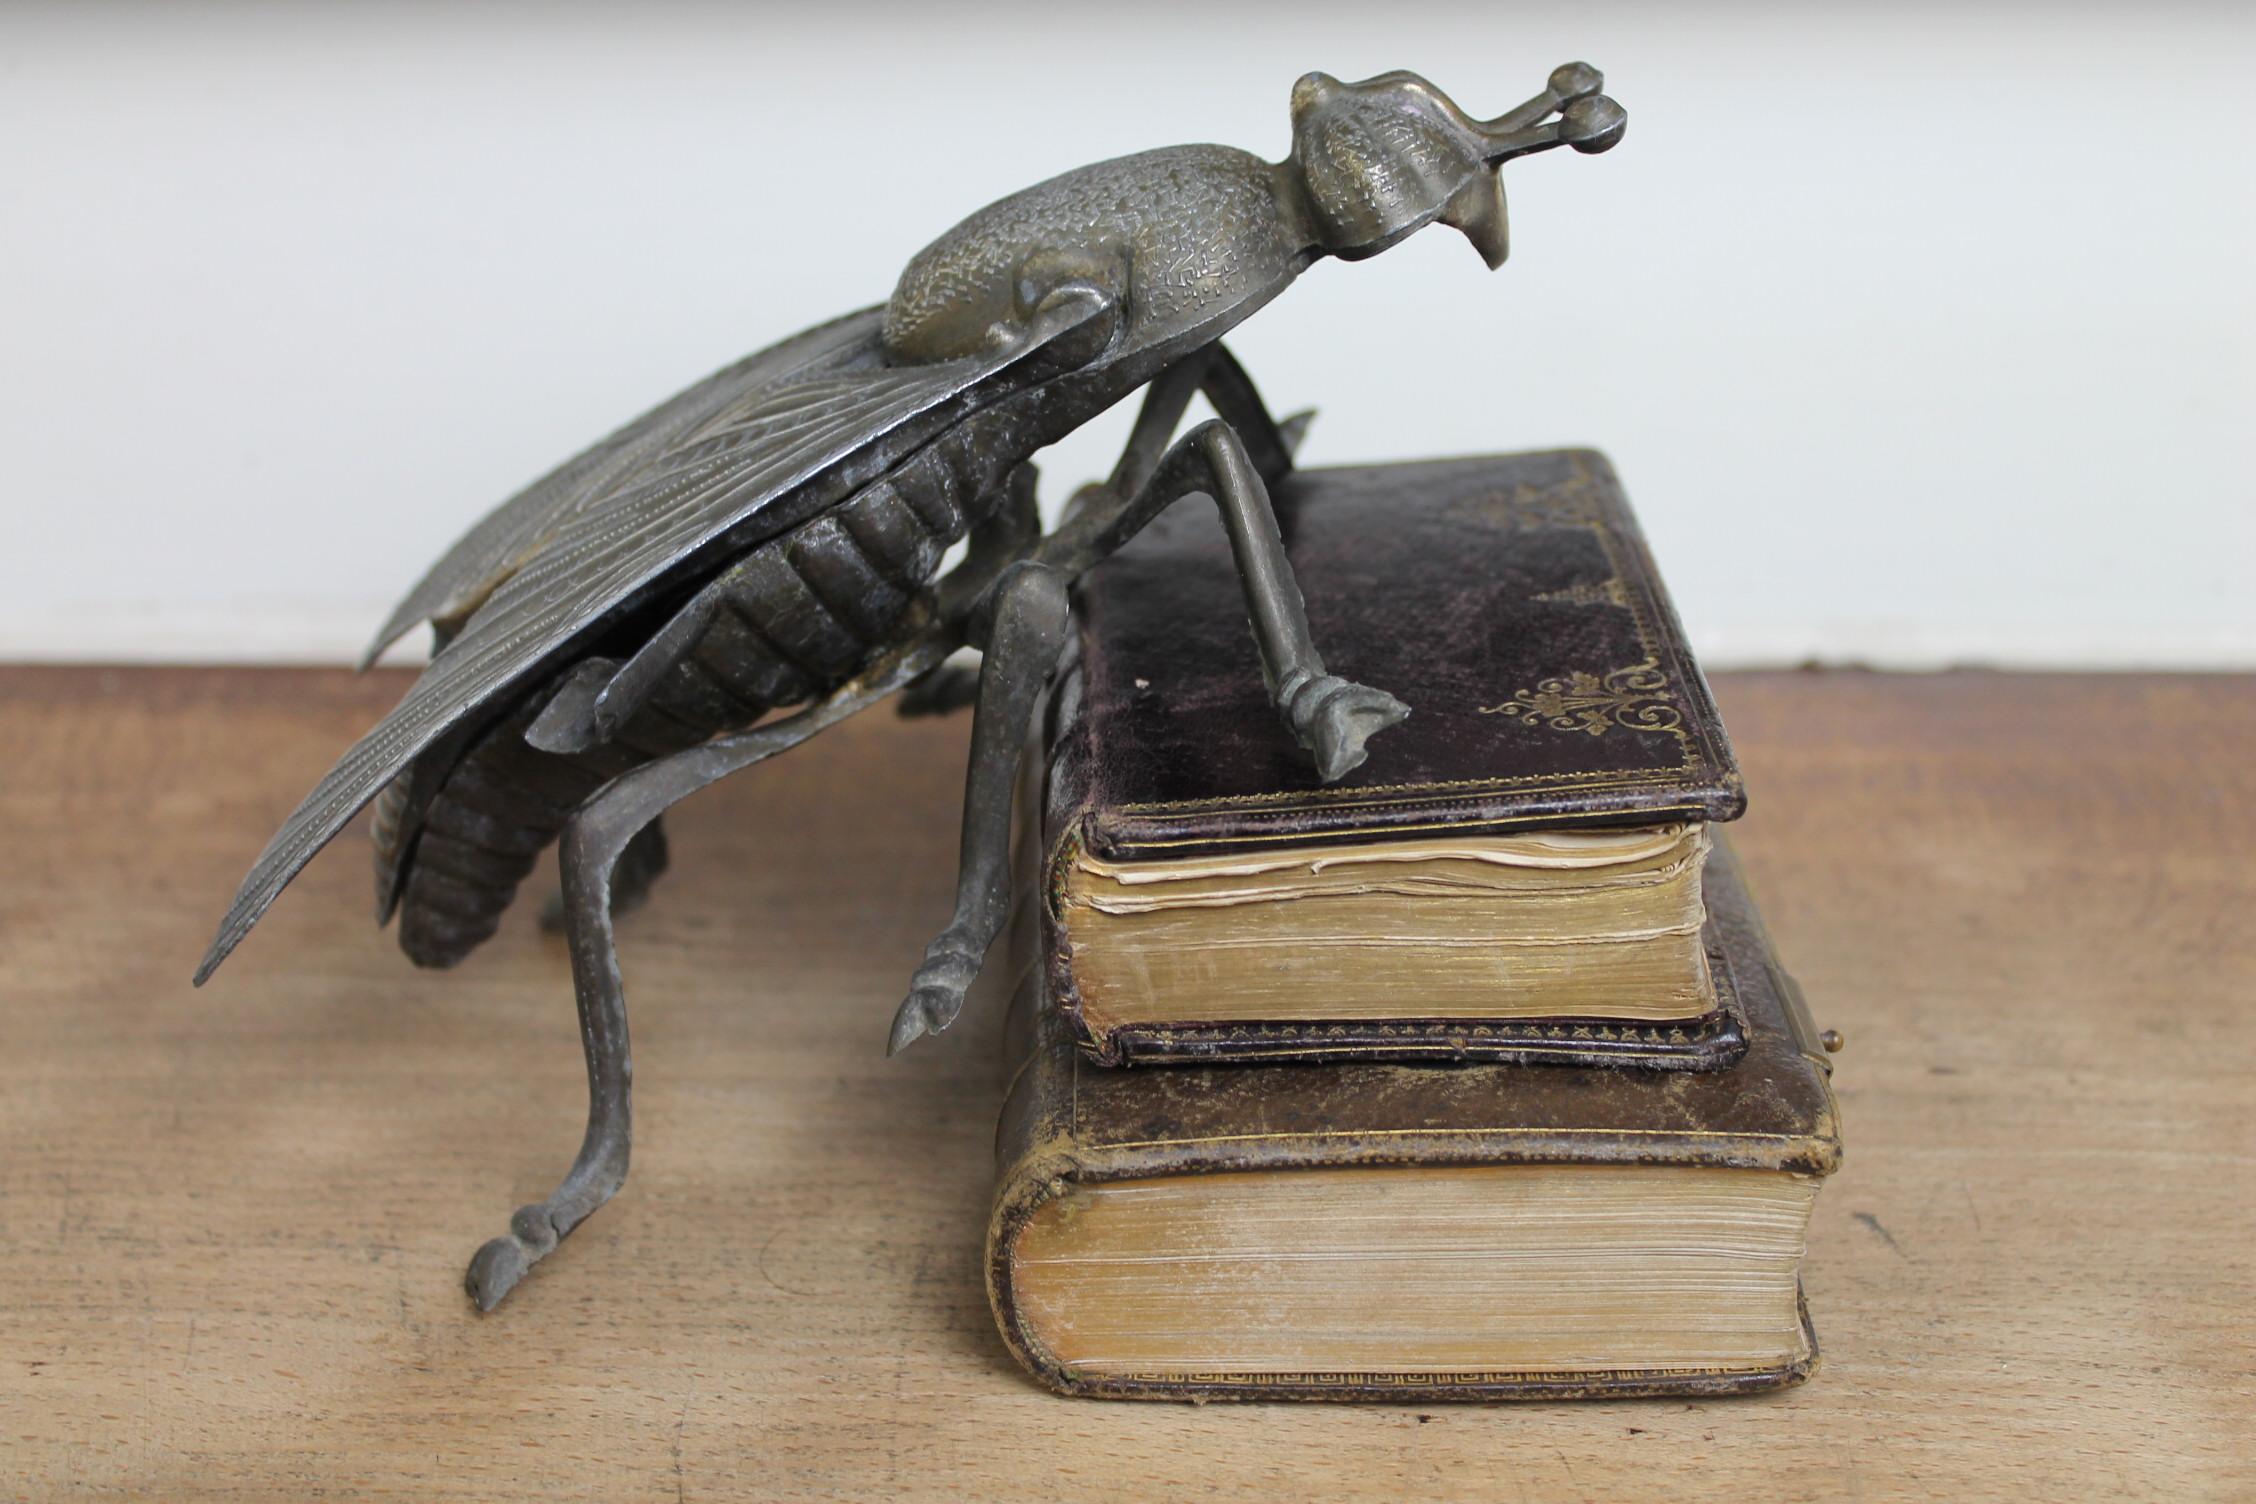 Vintage large scale Metal Fly Ashtray, Fly Figurine, Fly Sculpture, Fly Ashtray Art. 
This Insect Ashtray dates from the 1960-1970s. 
The fly can still be used as an ashtray or as Decoration Object - Insect Statue - Collectable Object or as a